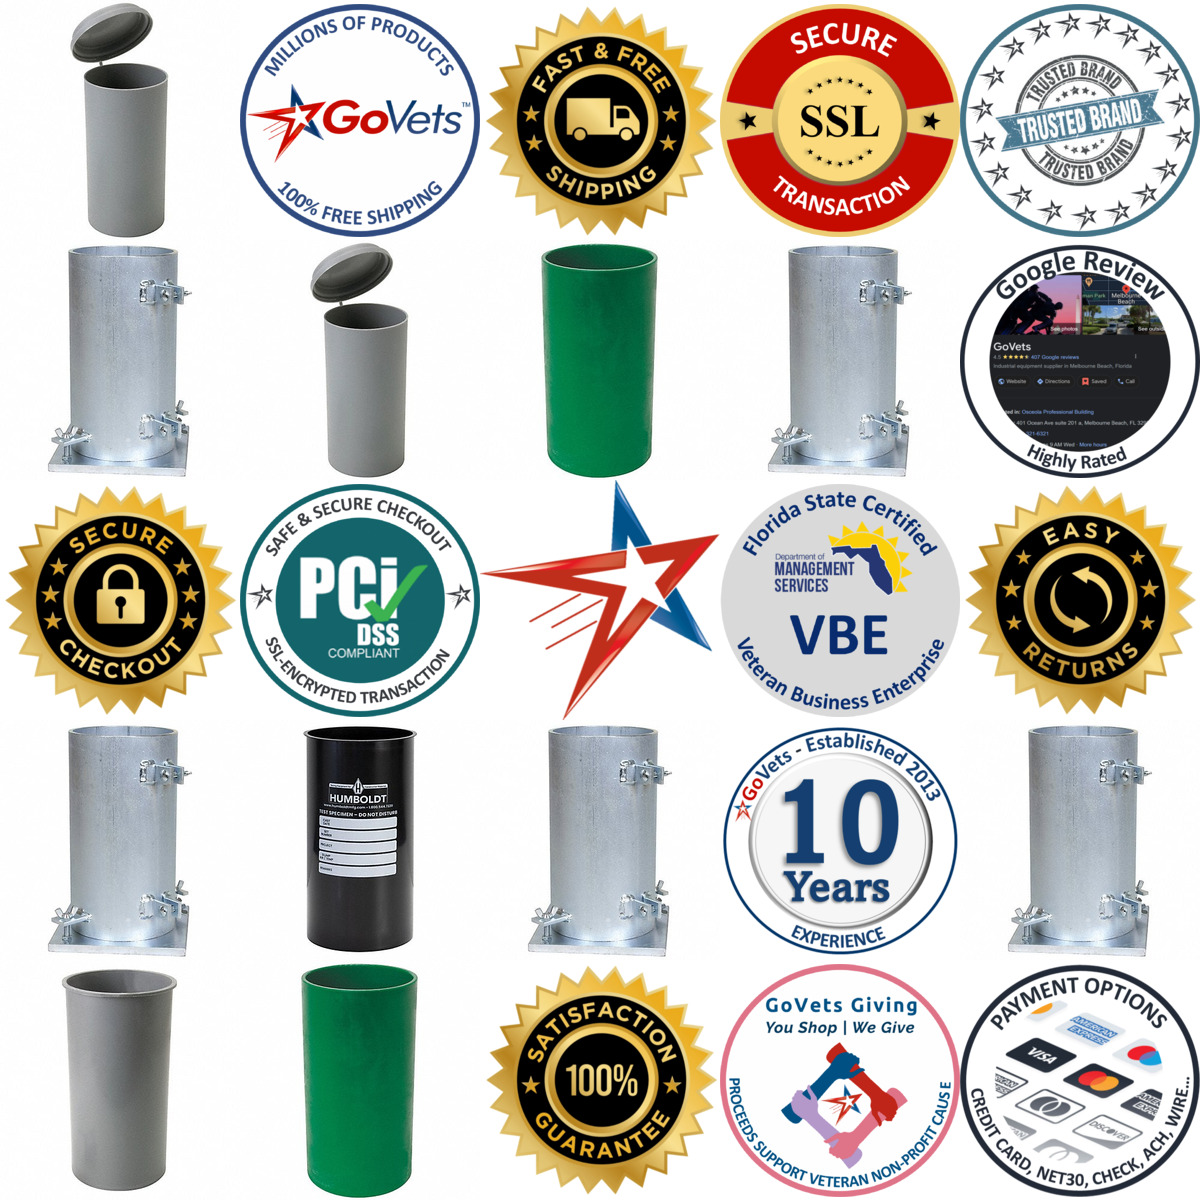 A selection of Cylinder Molds products on GoVets